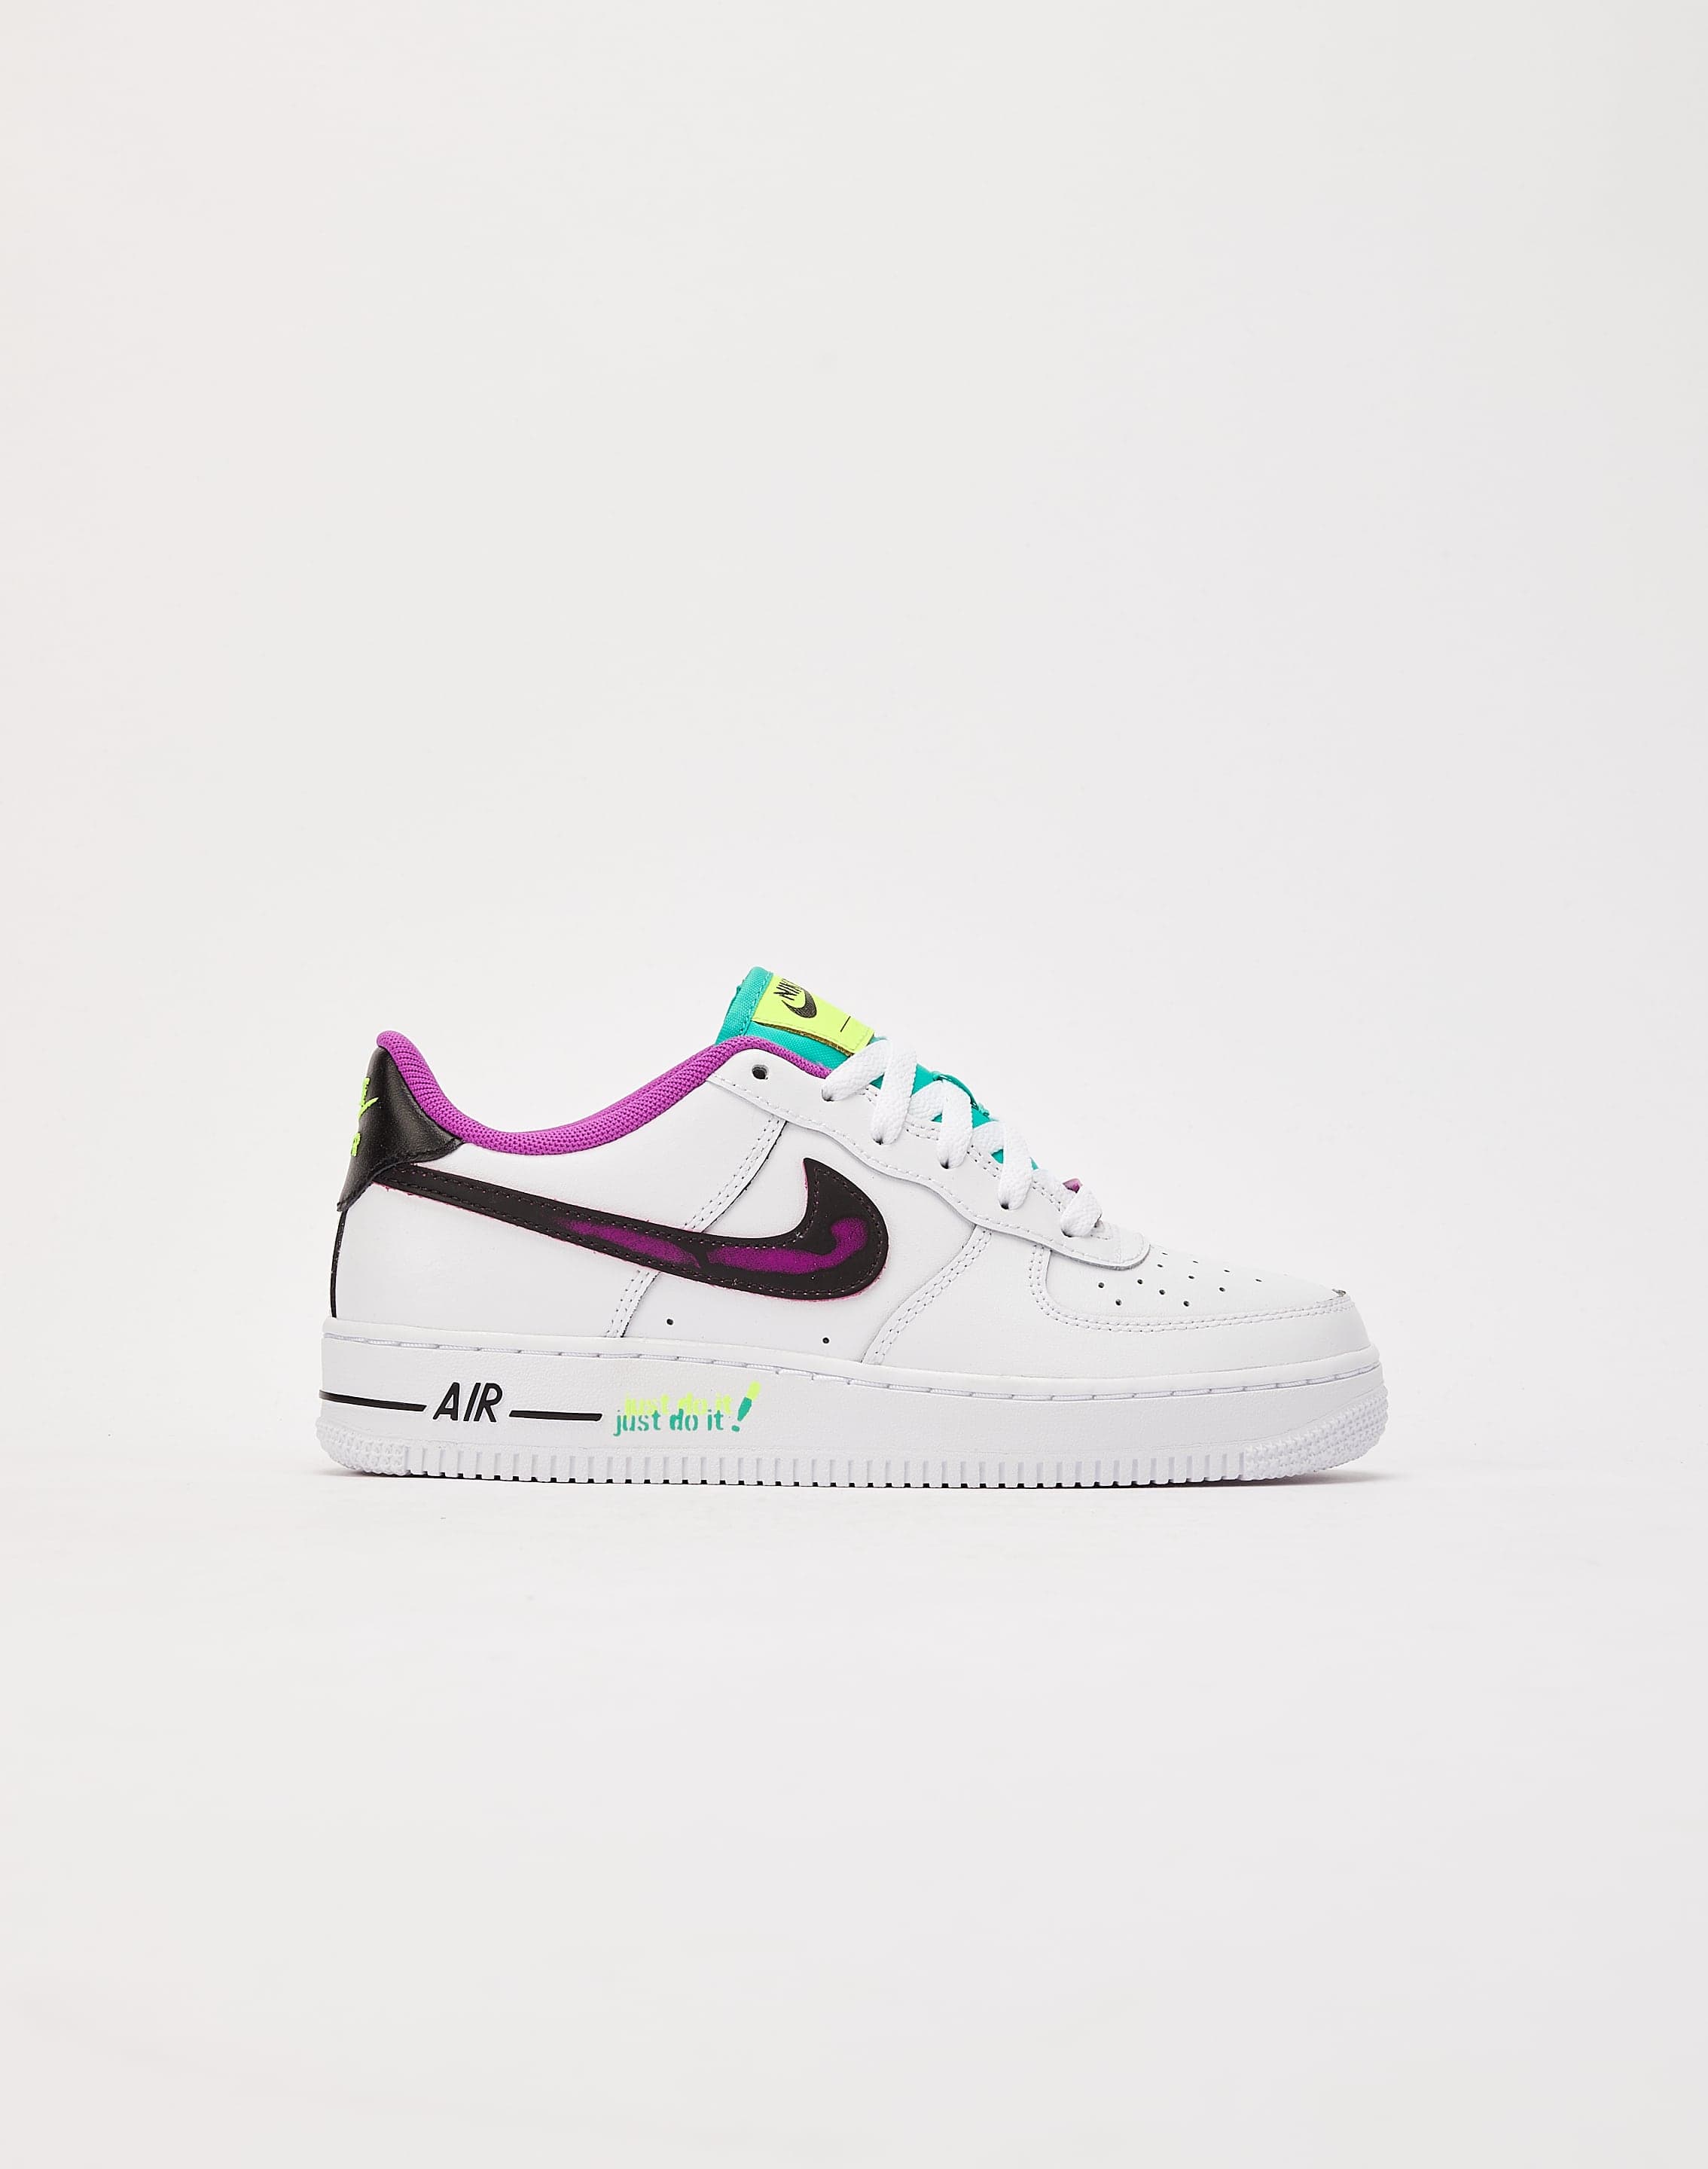 Nike Air Force Low LV8 'Just Do It' – DTLR